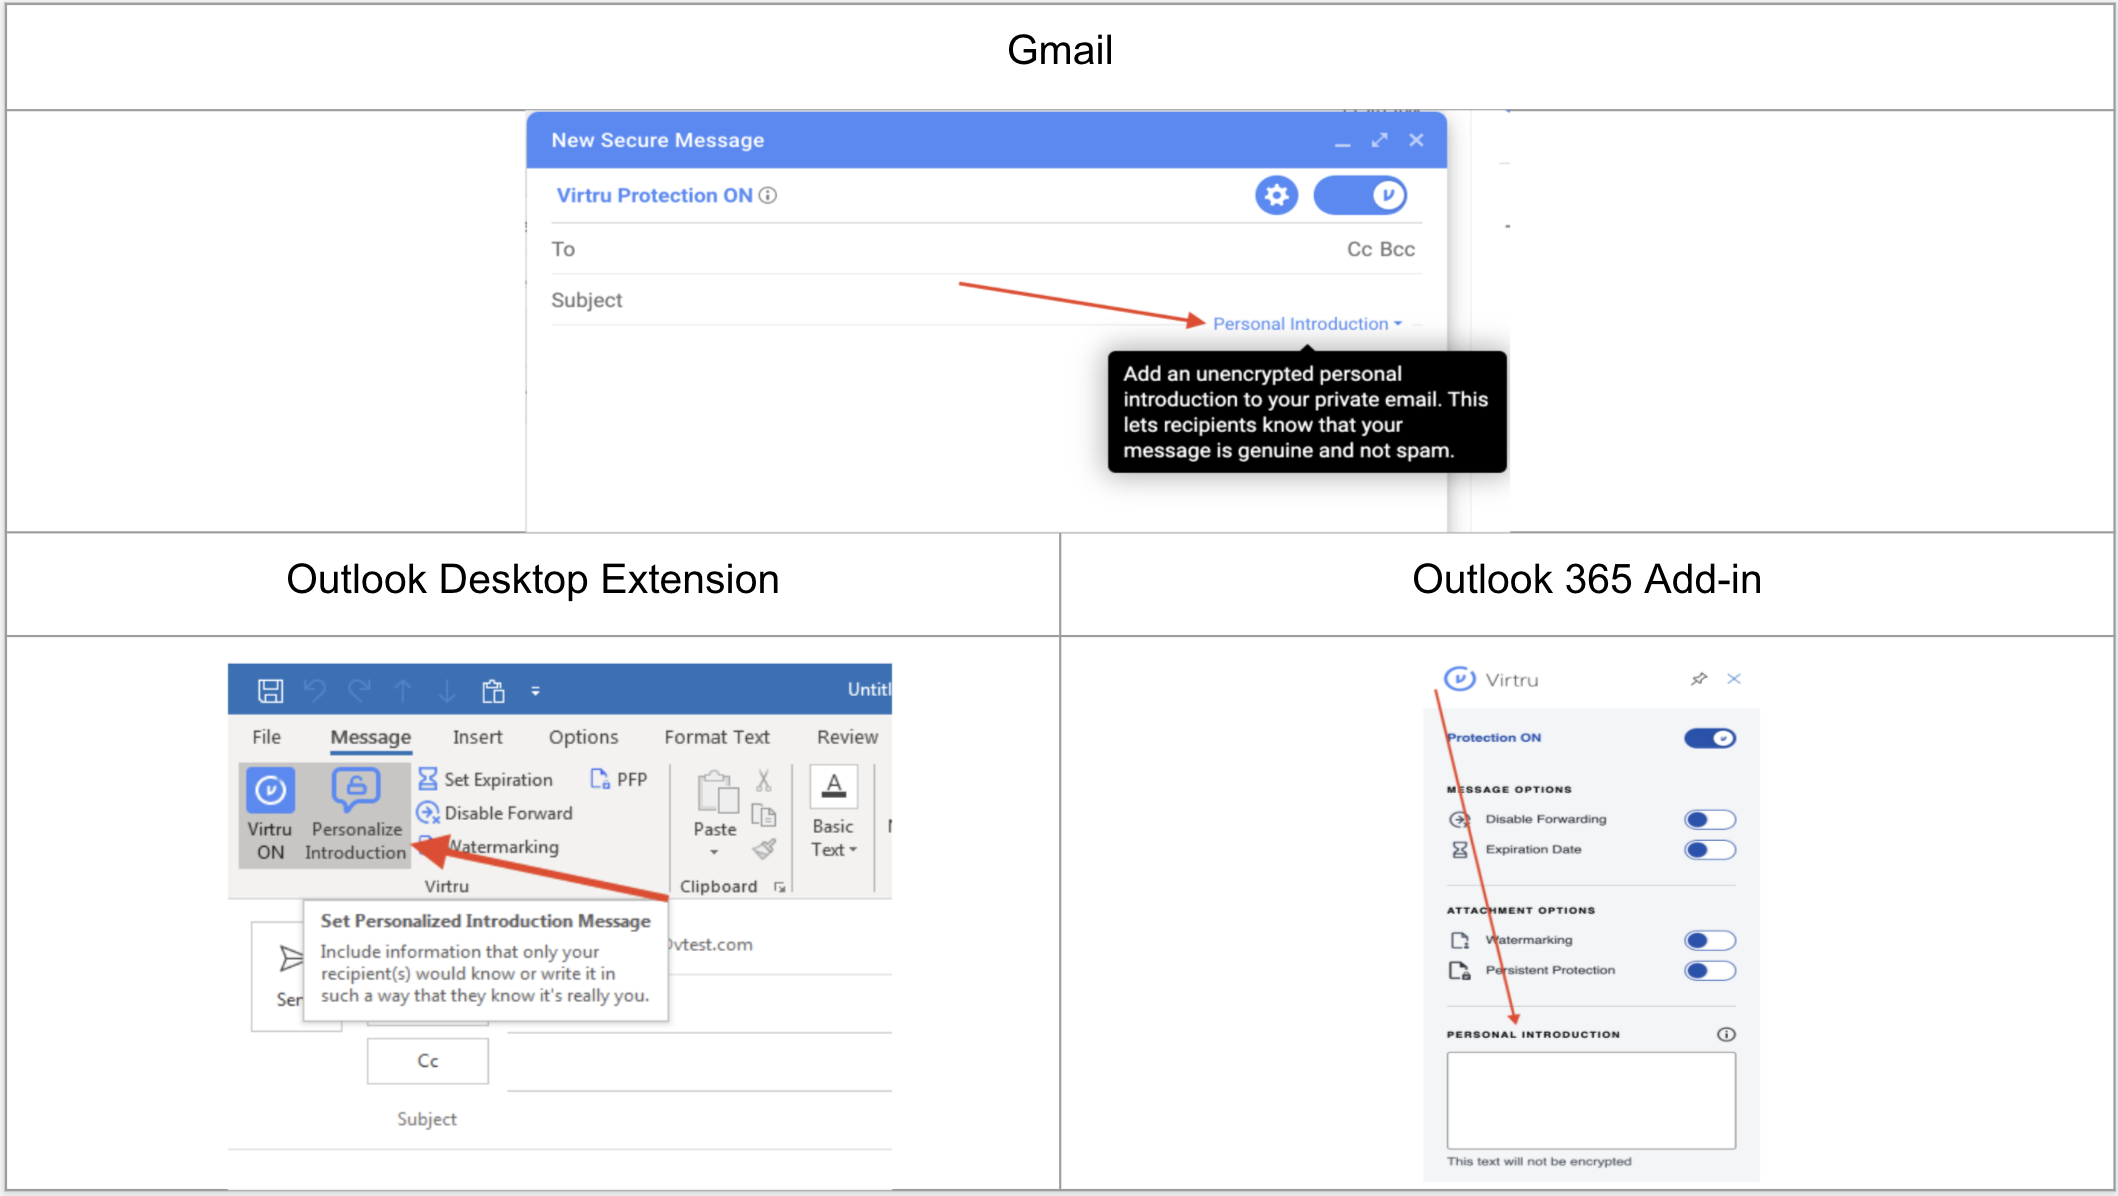 Location of where to toggle on Personal Introduction for Virtru in Gmail, Outlook Destkop, and Outlook Web App Addin